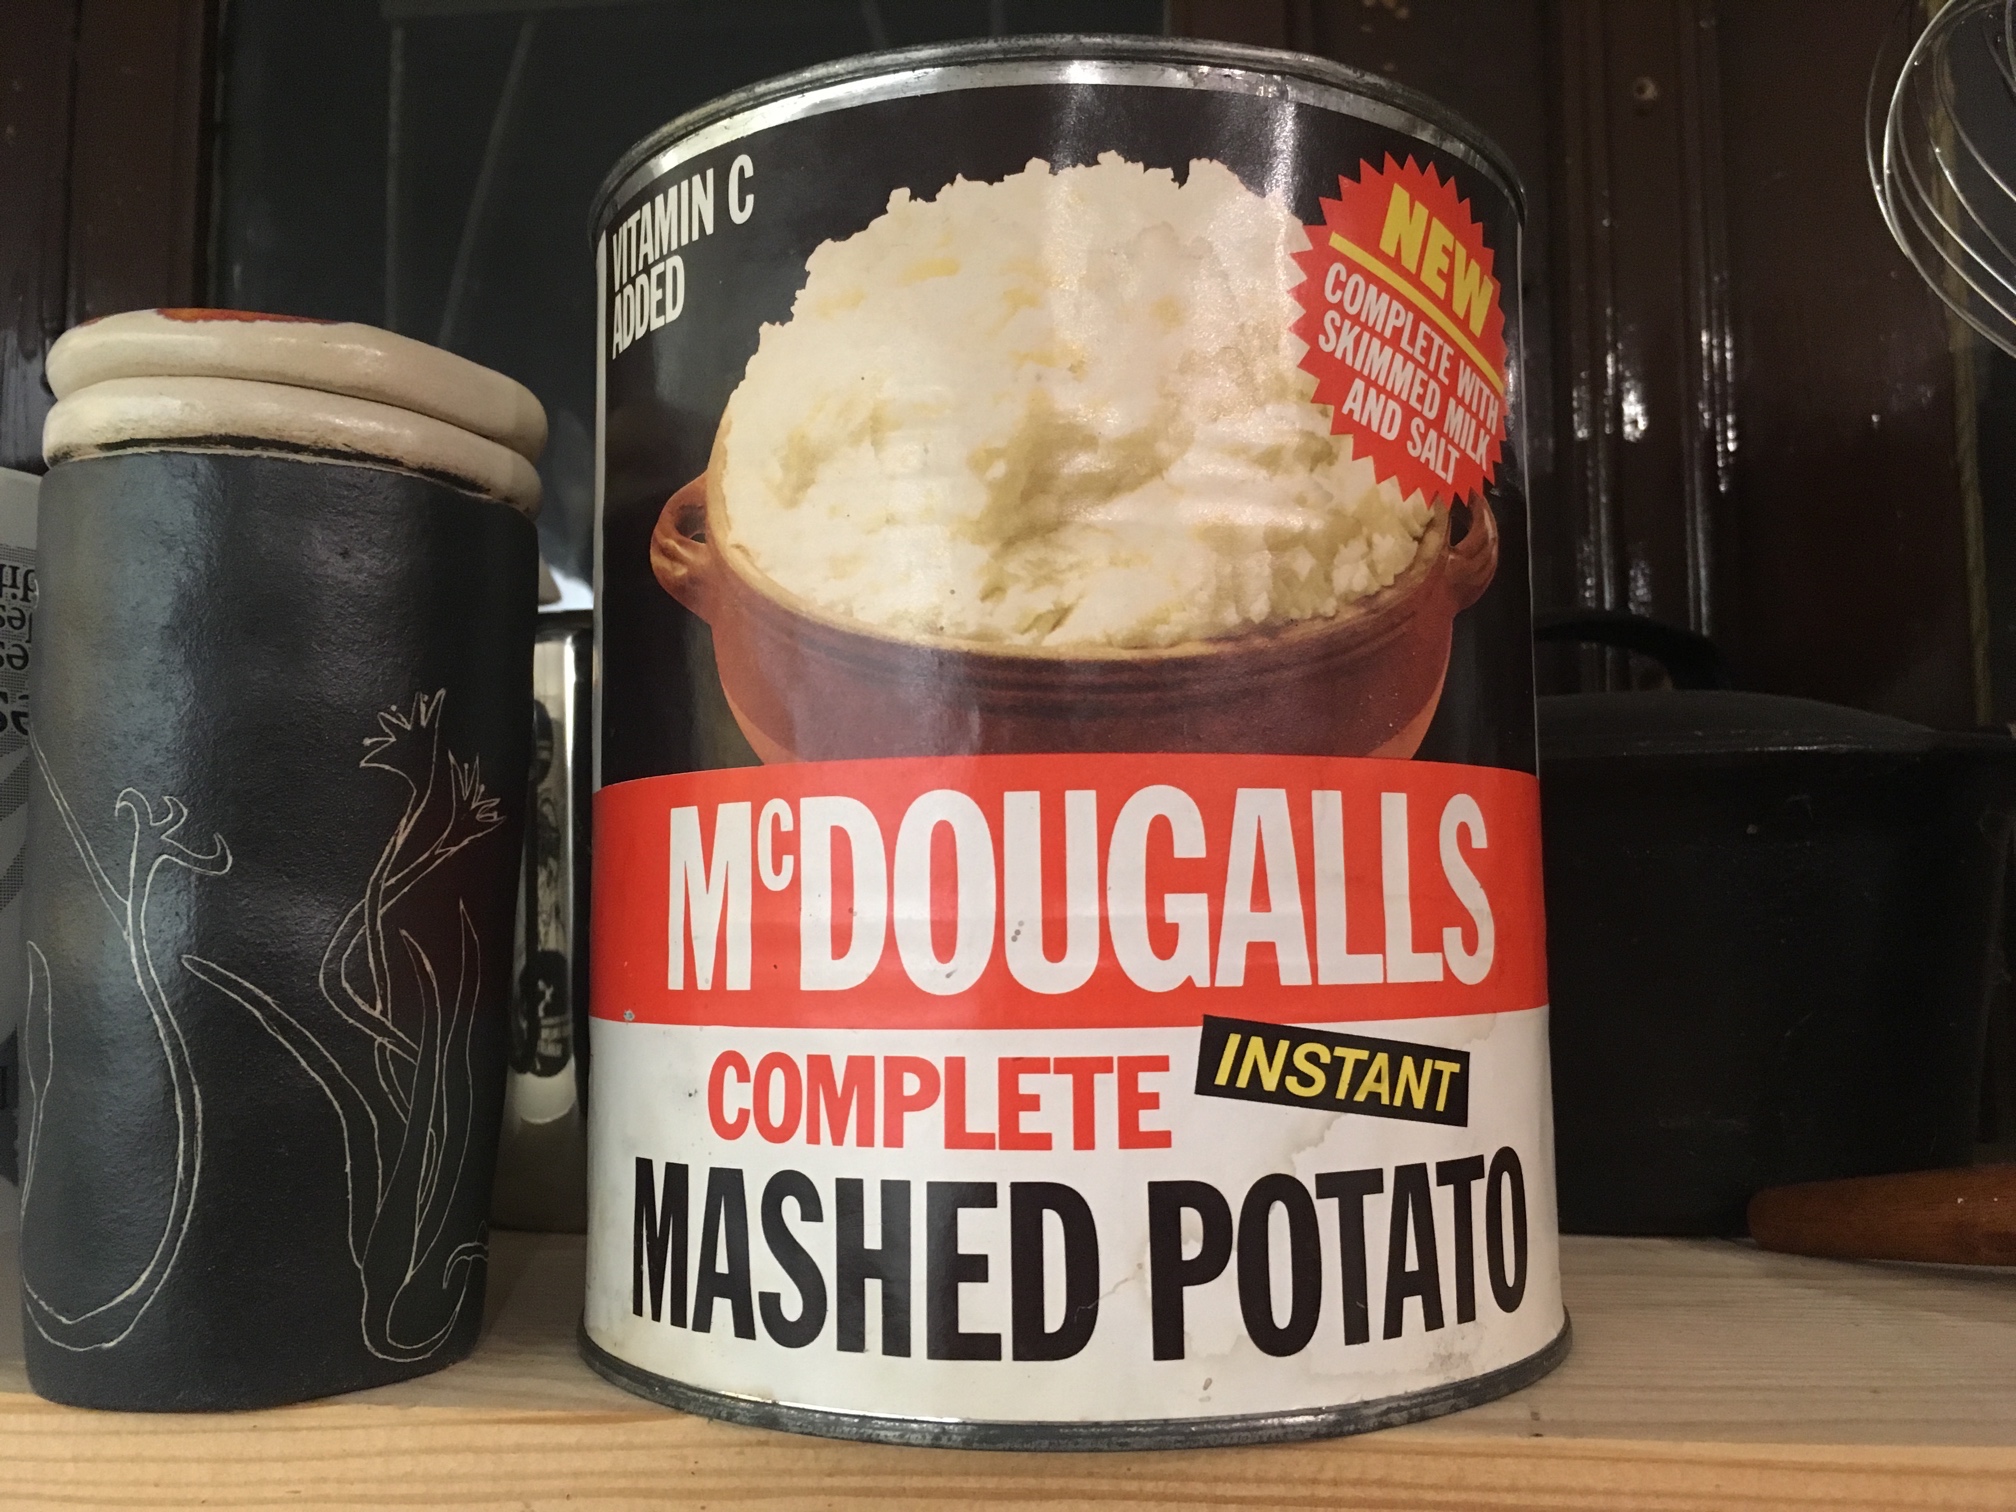 A huge, tin of “McDougals Instant Mashed Potato” sitting on a shelf